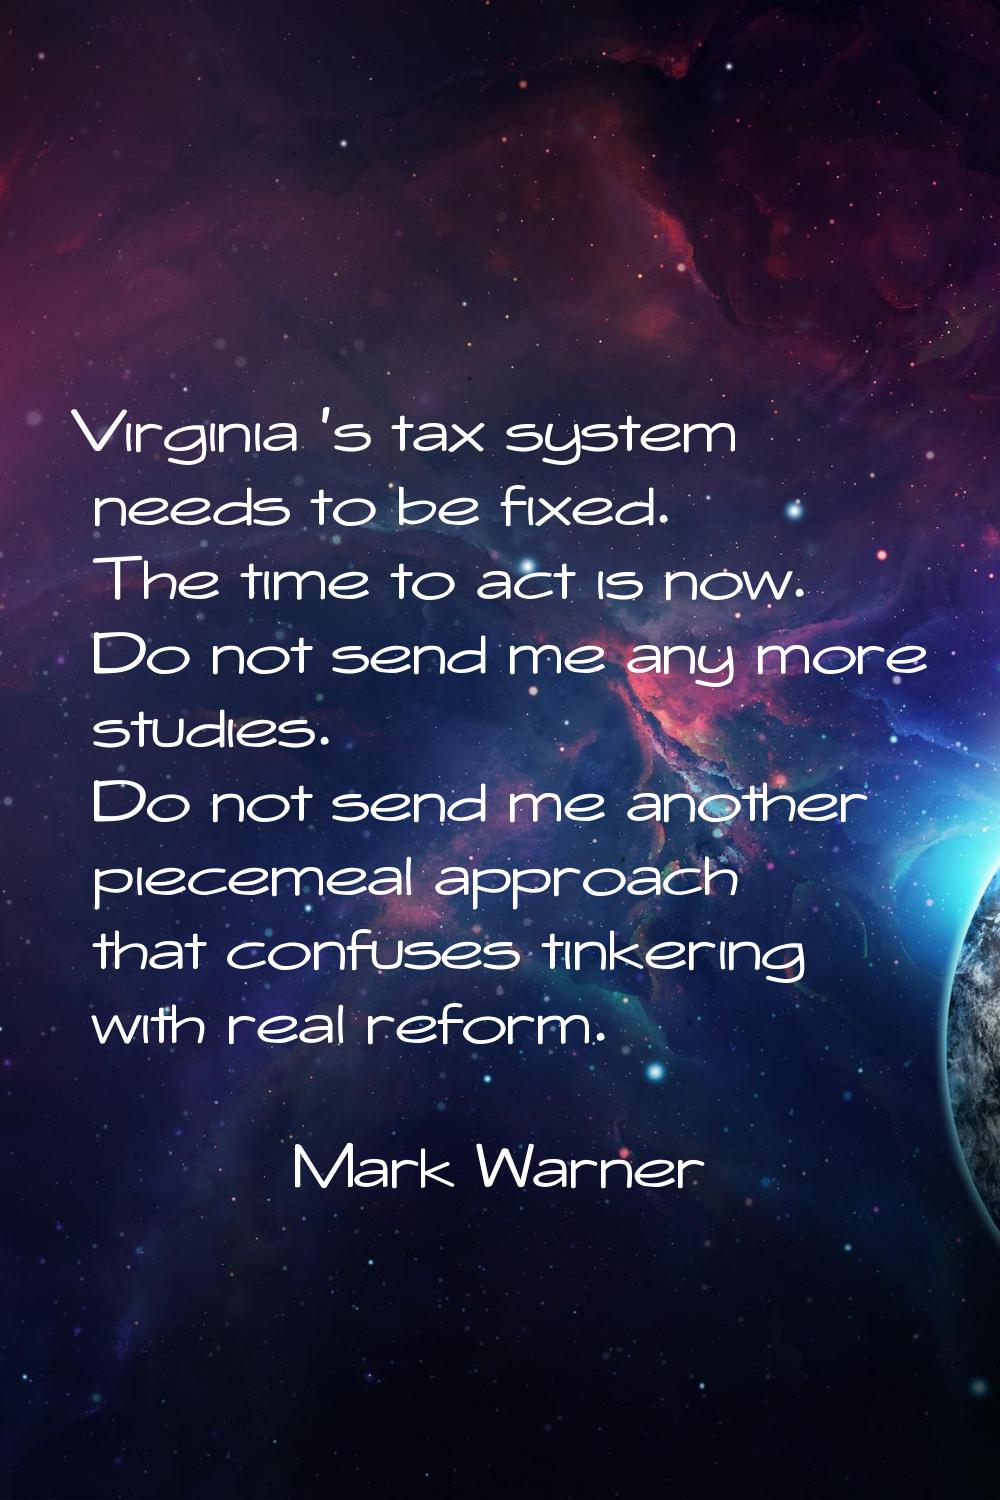 Virginia 's tax system needs to be fixed. The time to act is now. Do not send me any more studies. 